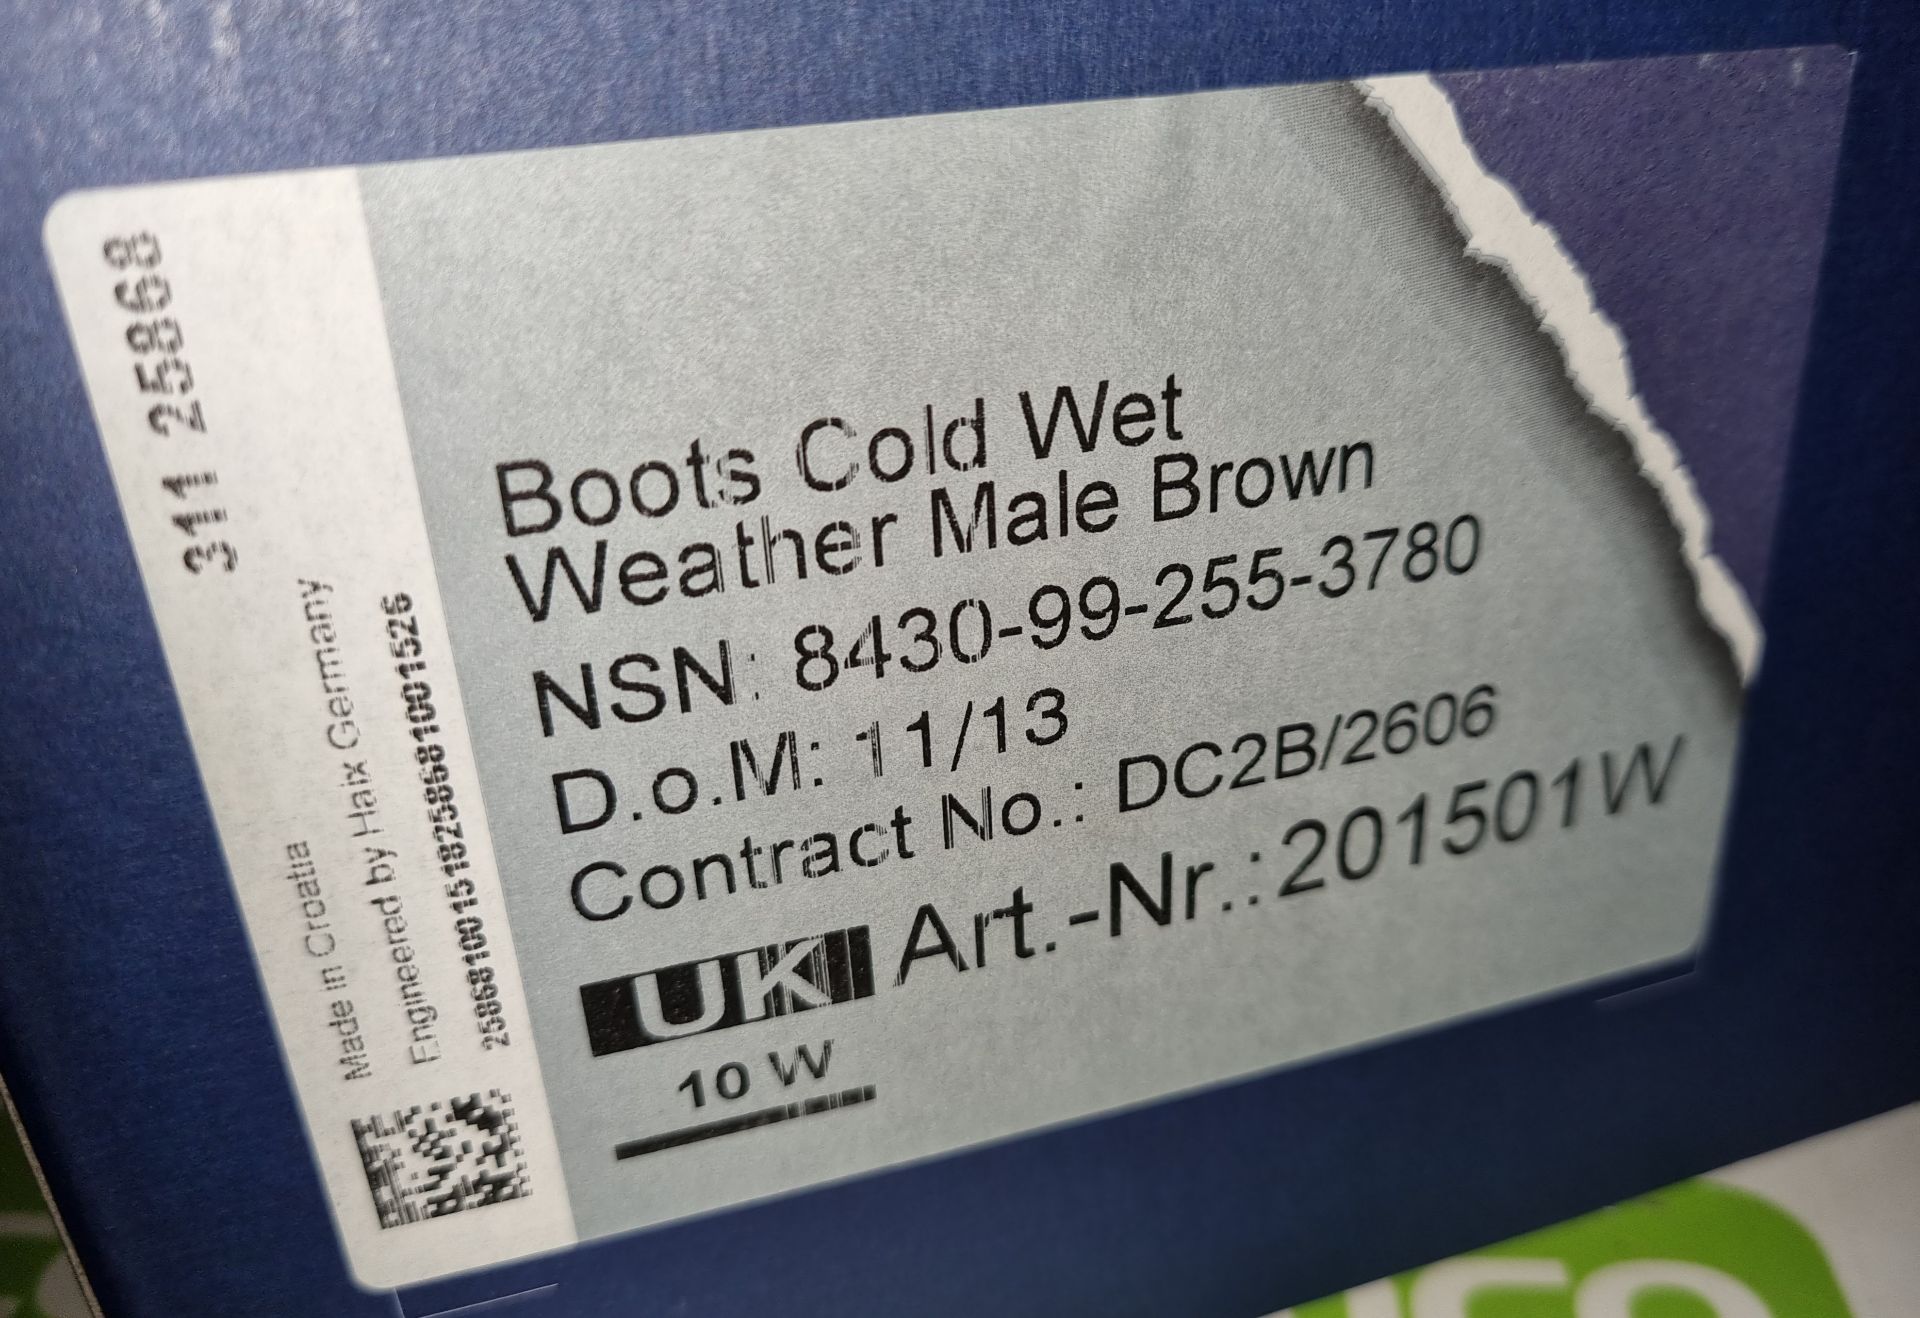 19x pairs of Haix cold wet weather boots - Size 10W - Image 3 of 4